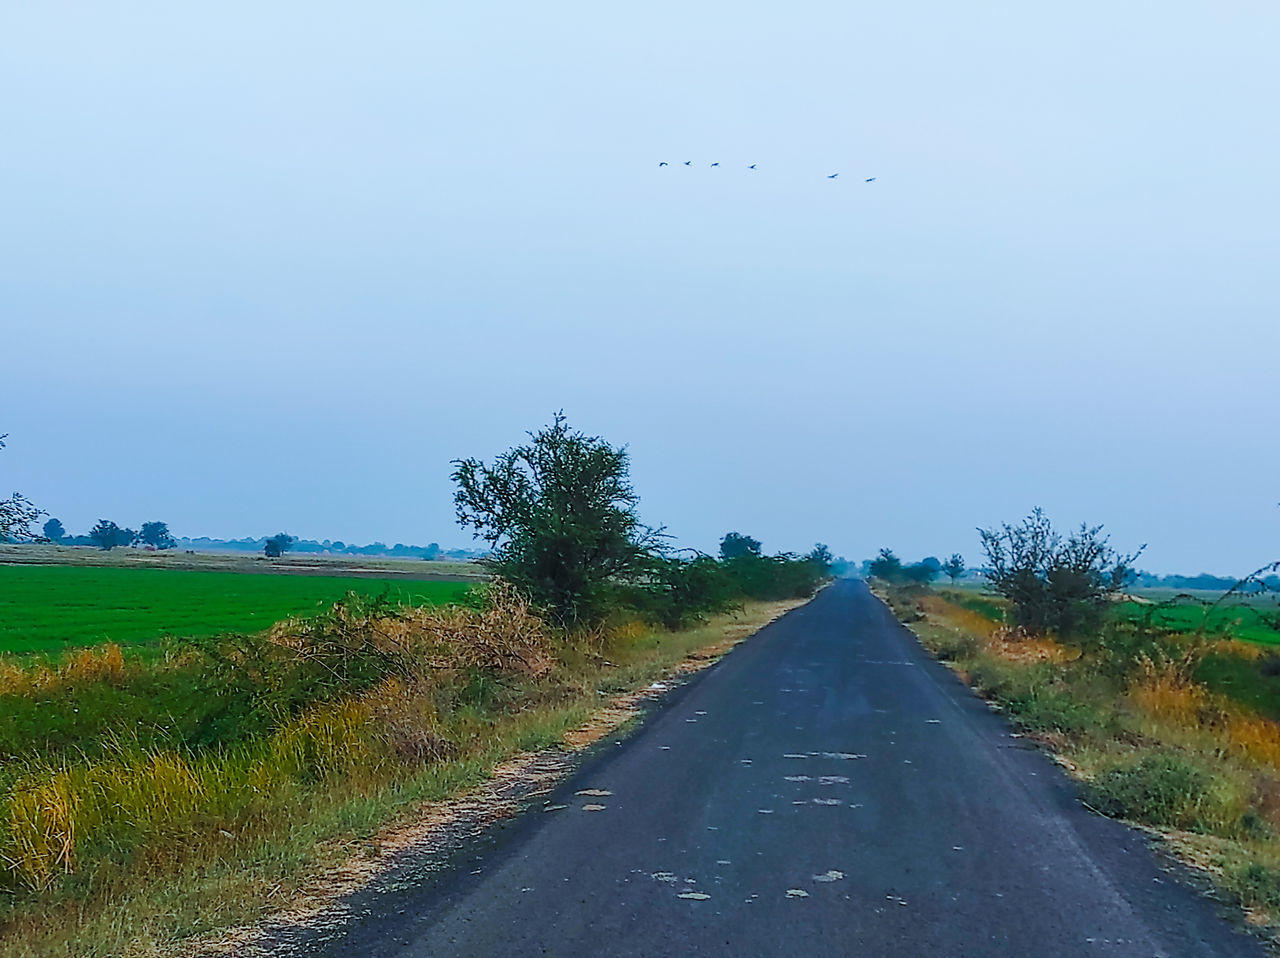 road, transportation, sky, the way forward, horizon, landscape, nature, environment, plant, diminishing perspective, vanishing point, rural area, hill, highway, no people, land, prairie, plain, scenics - nature, grass, beauty in nature, rural scene, animal, tranquility, animal wildlife, road trip, field, tranquil scene, animal themes, infrastructure, tree, day, country road, travel, morning, outdoors, empty road, non-urban scene, cloud, blue, travel destinations, bird, dirt road, wildlife, flying, asphalt, grassland, clear sky